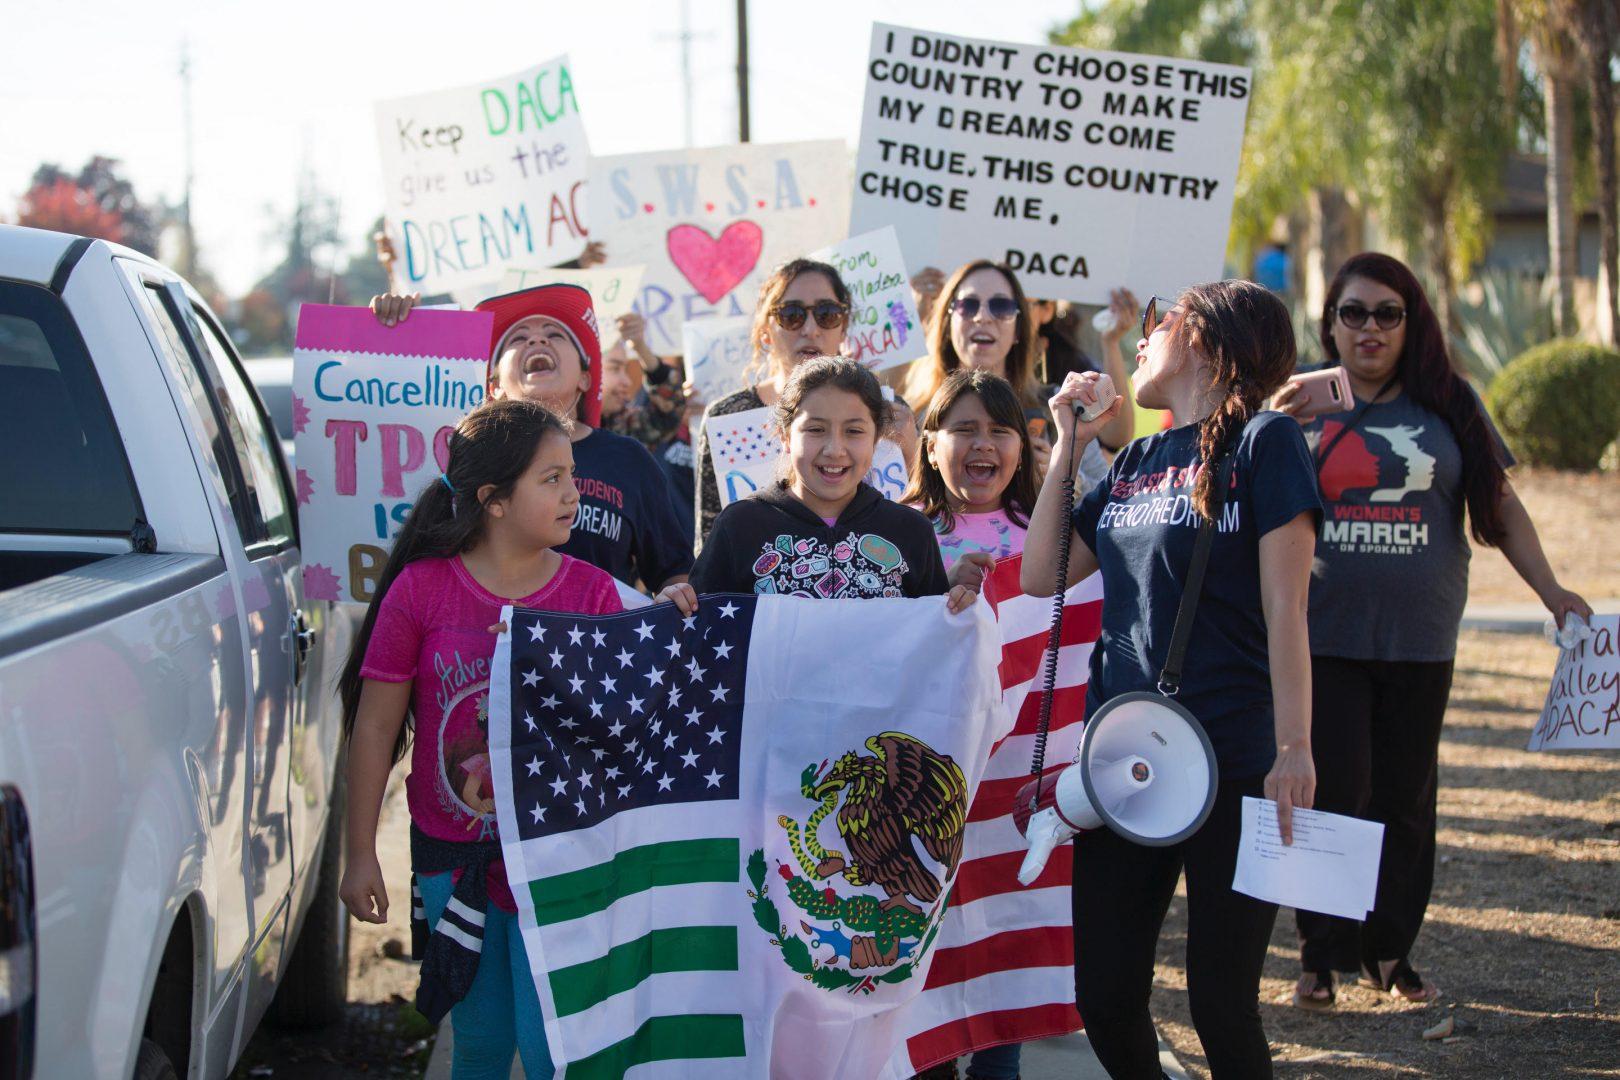 The university’s Social Work Student Association led a march in Reedley on Nov. 18, 2017, where more than 50 people called for immigration reform. (Daniel Avalos/The Collegian)